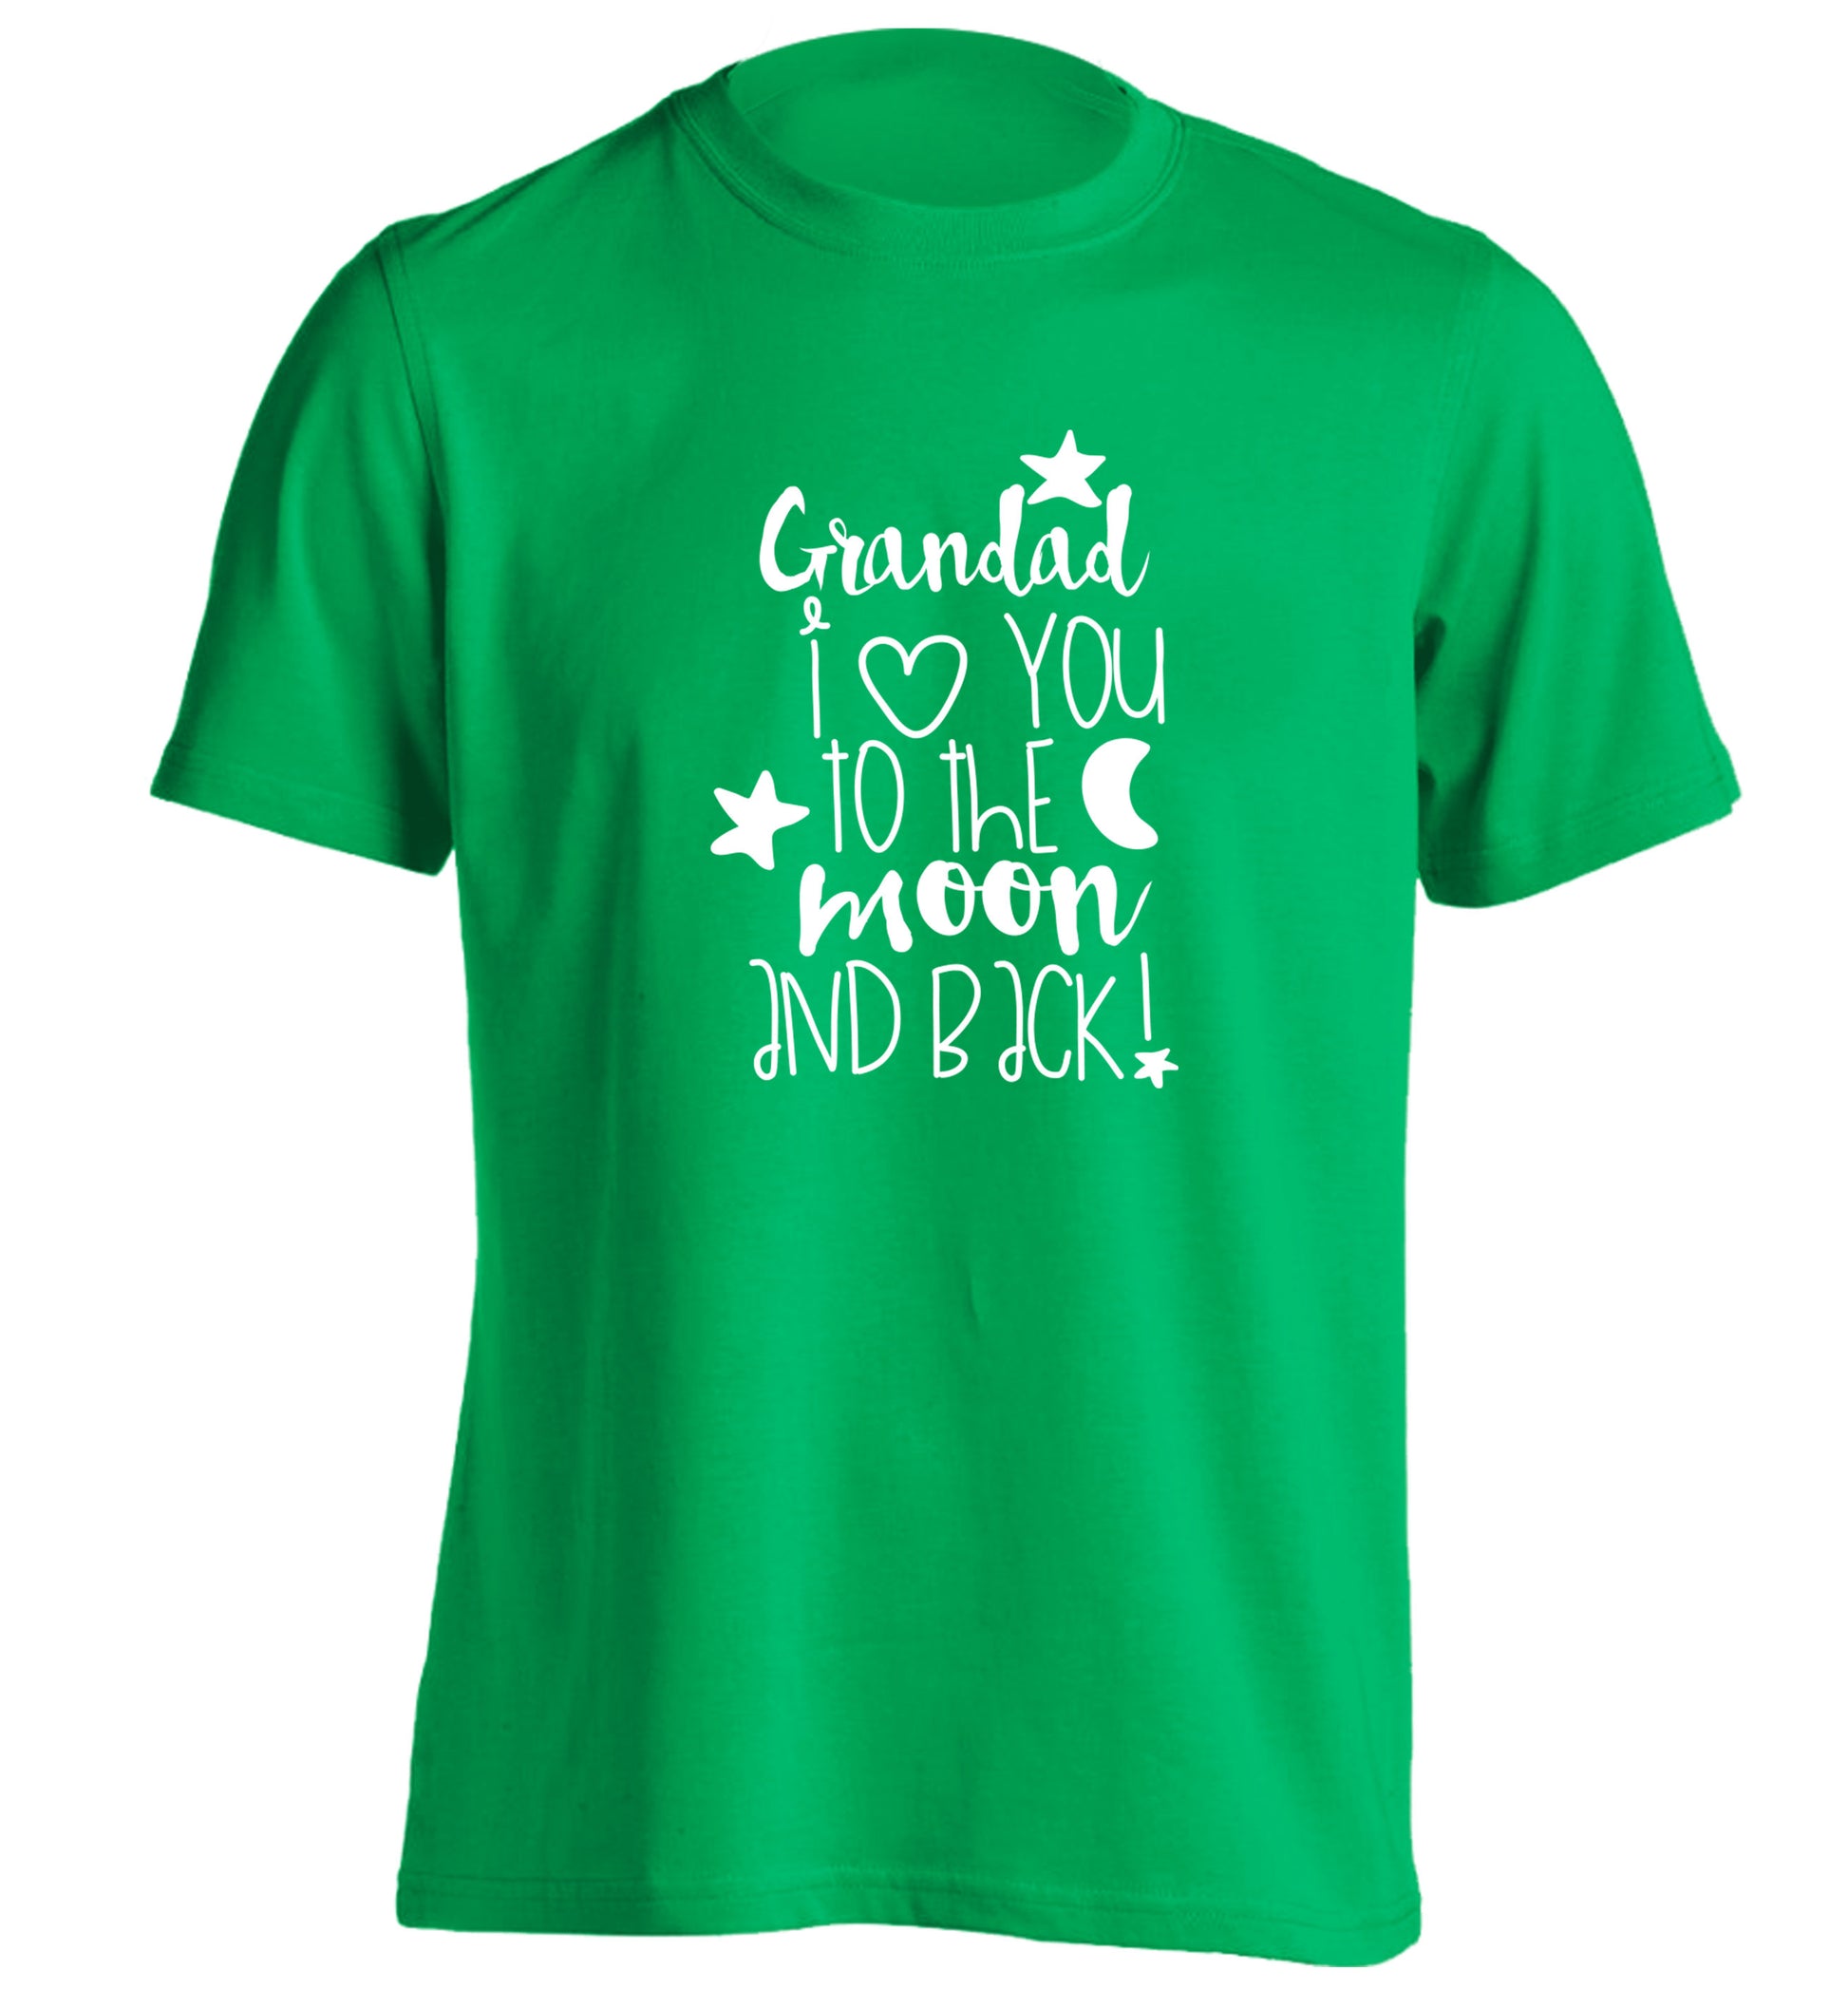 Grandad's I love you to the moon and back adults unisex green Tshirt 2XL